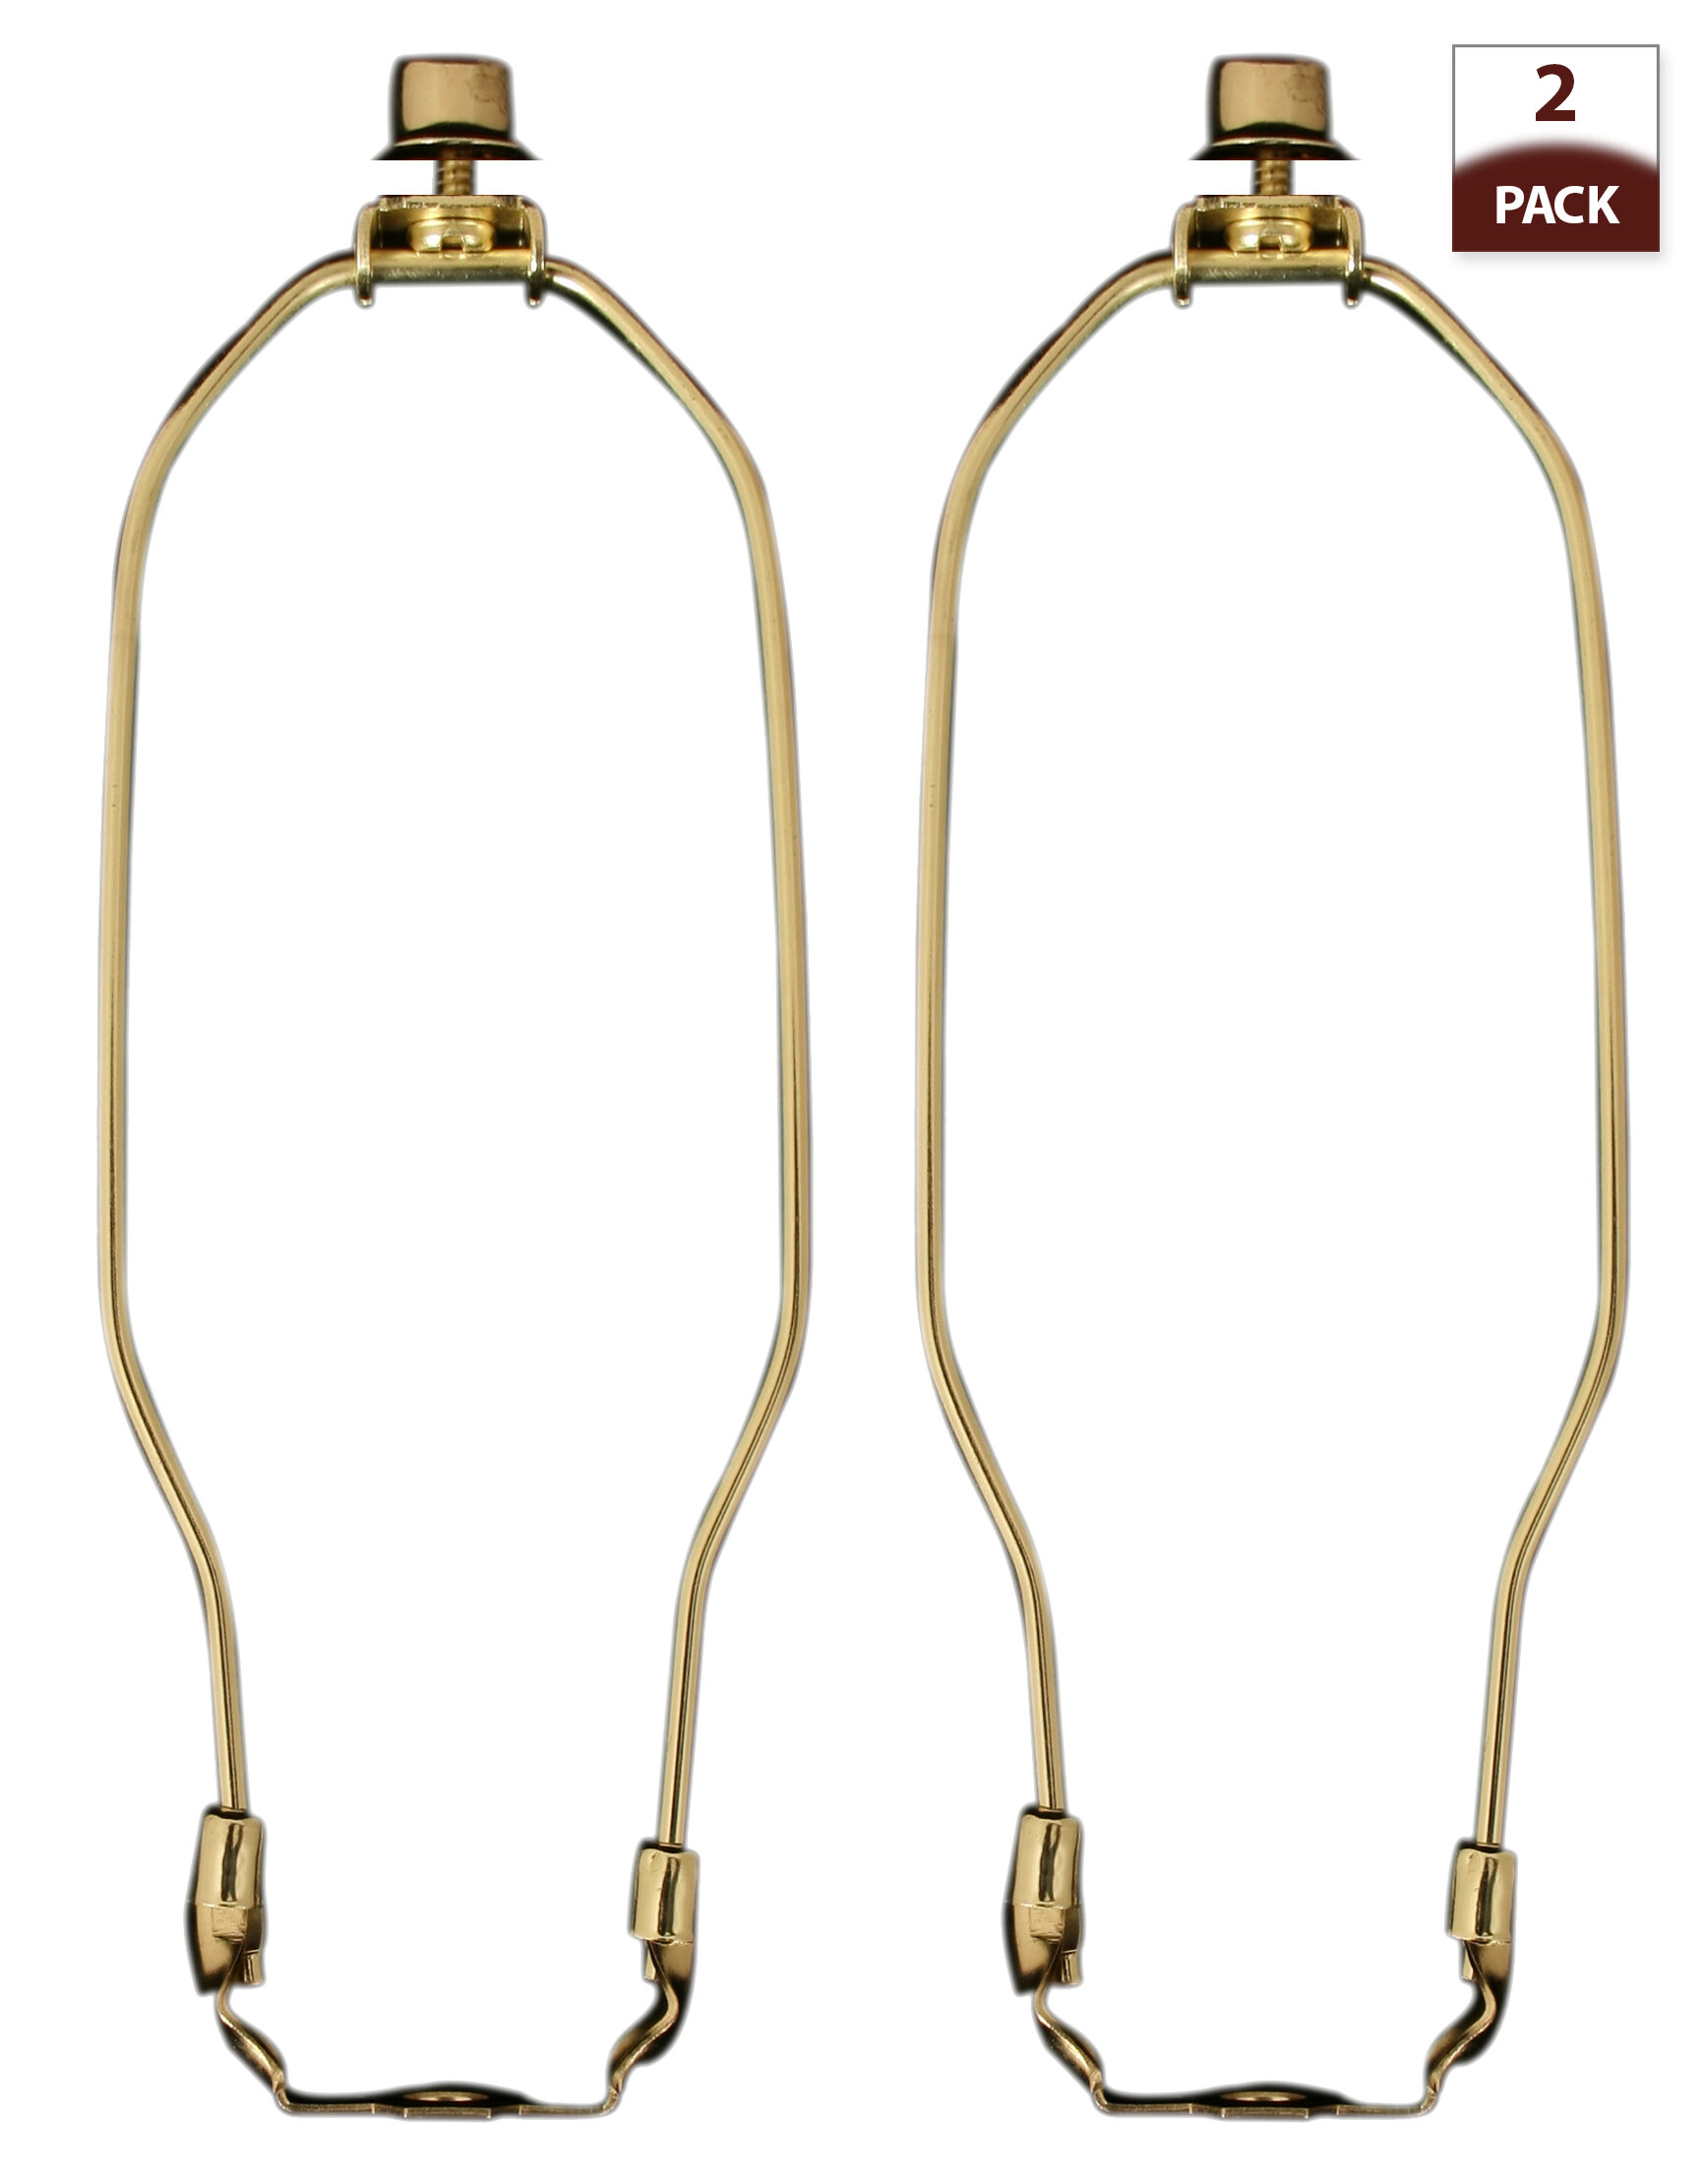 Finial and Lamp Harp Holder Set HA-1001-8BR-1 Polished Brass Royal Designs 8 Heavy Duty Lamp Harp More Sizes Available 